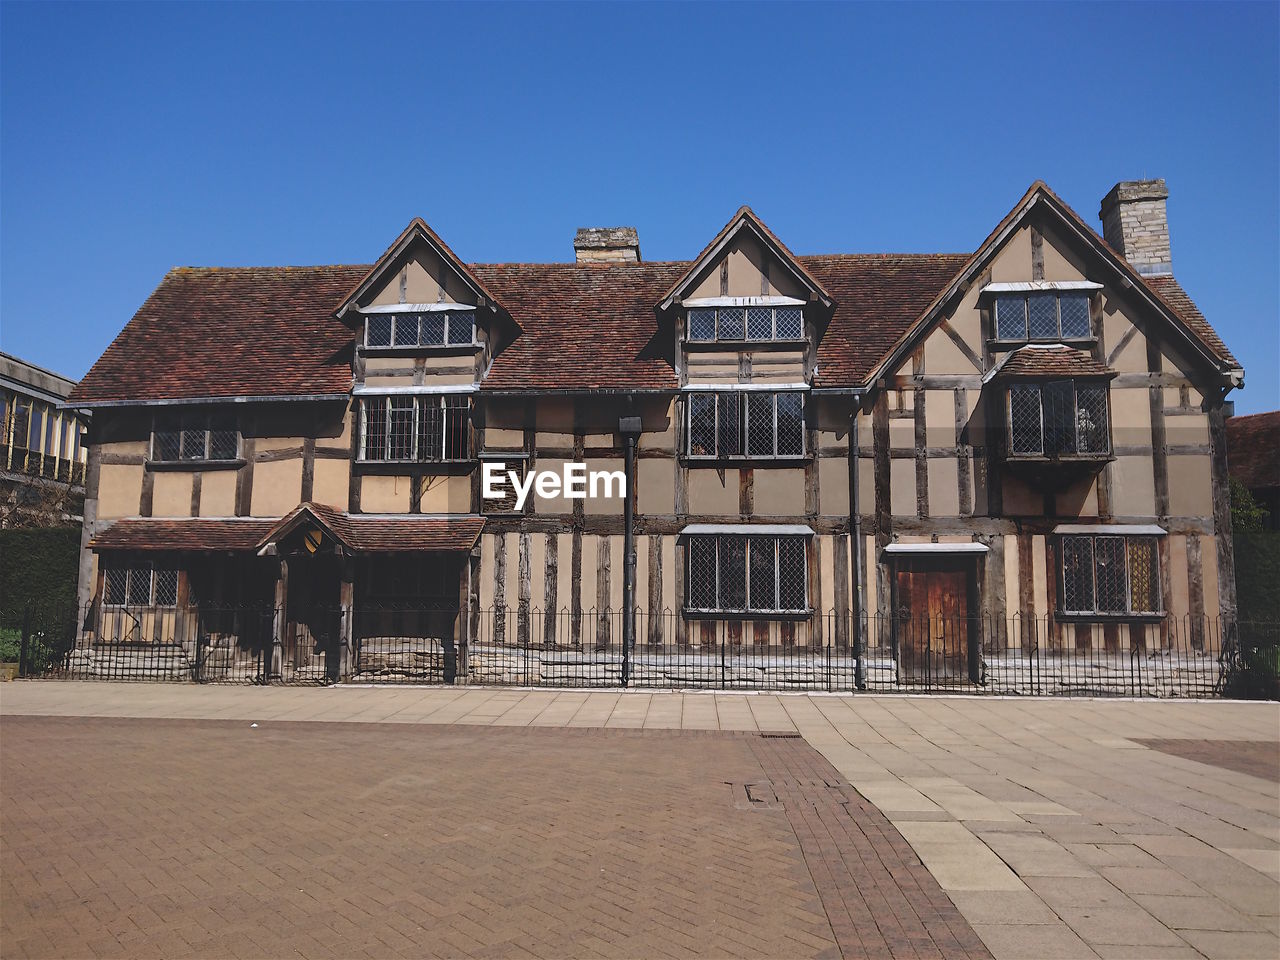 Shakespeare's birth place 